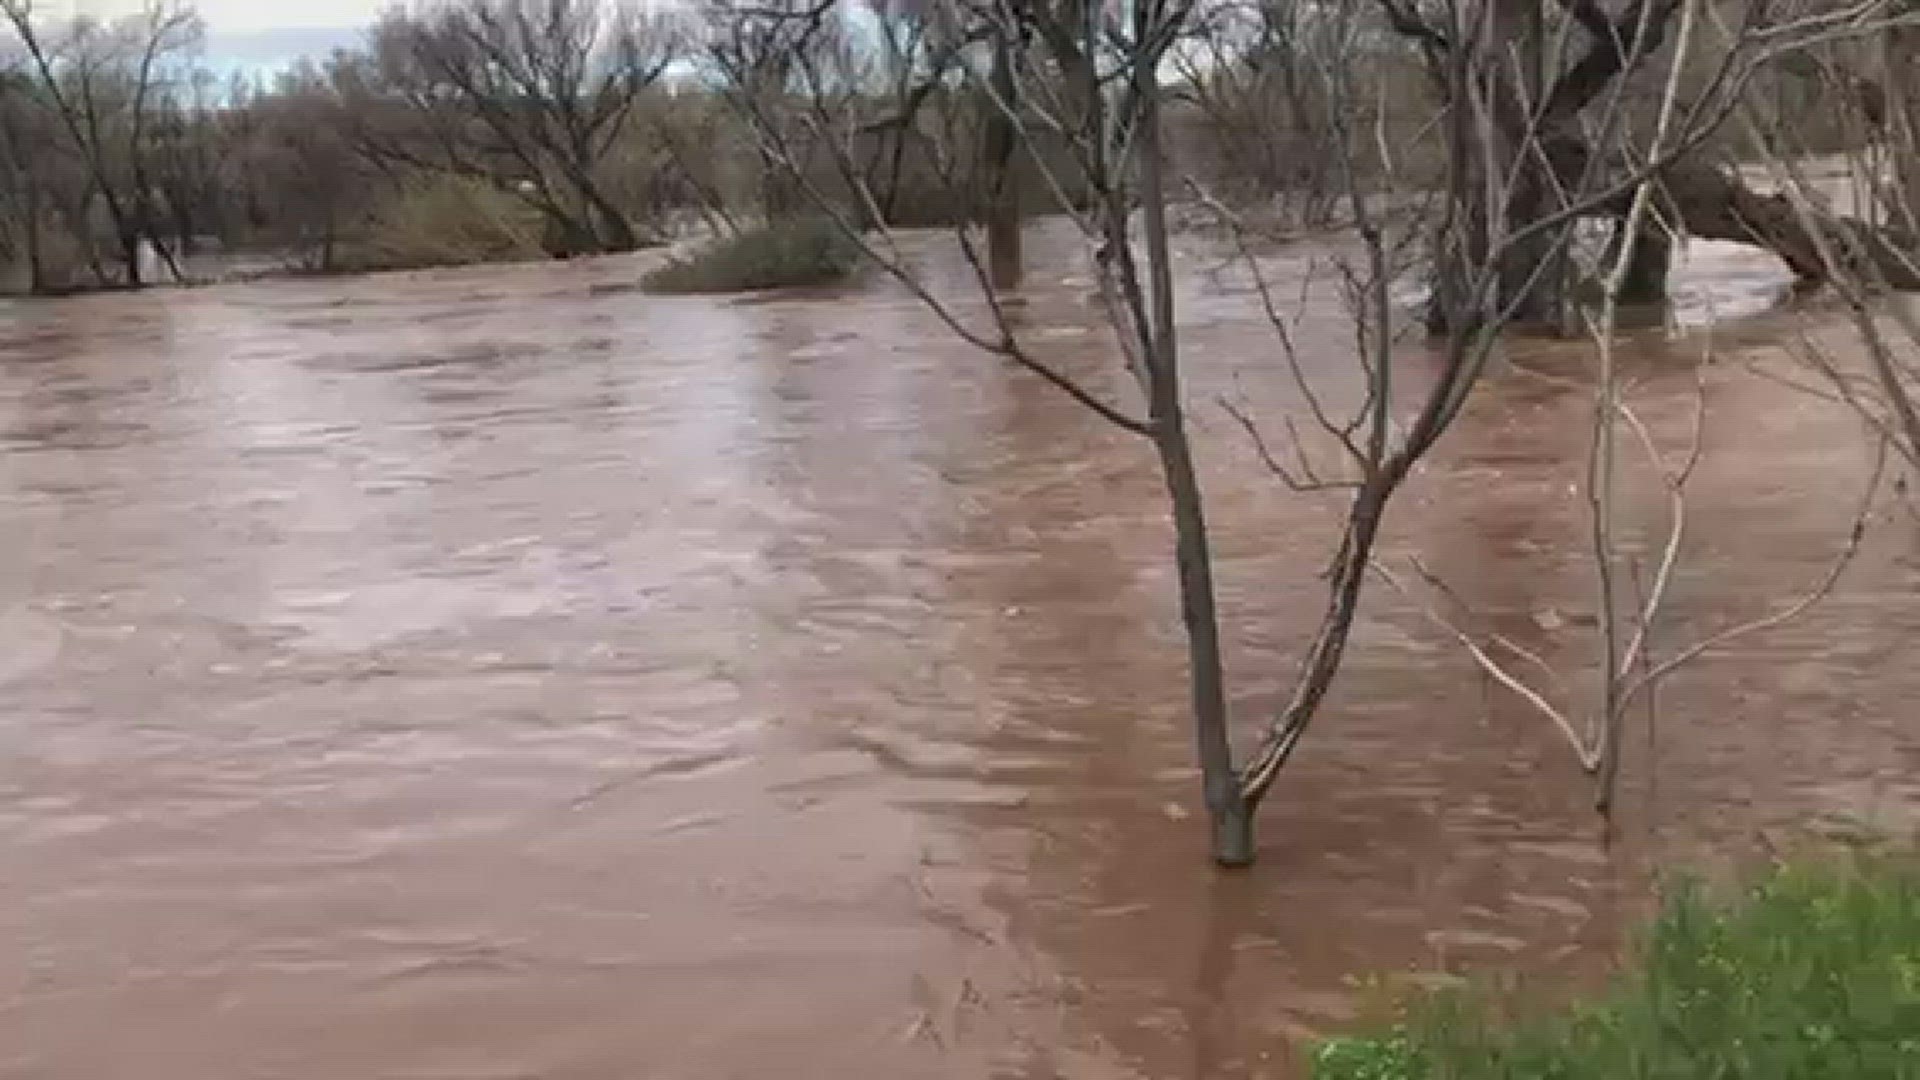 Video taken in the Camp Verde area shows the flooding.